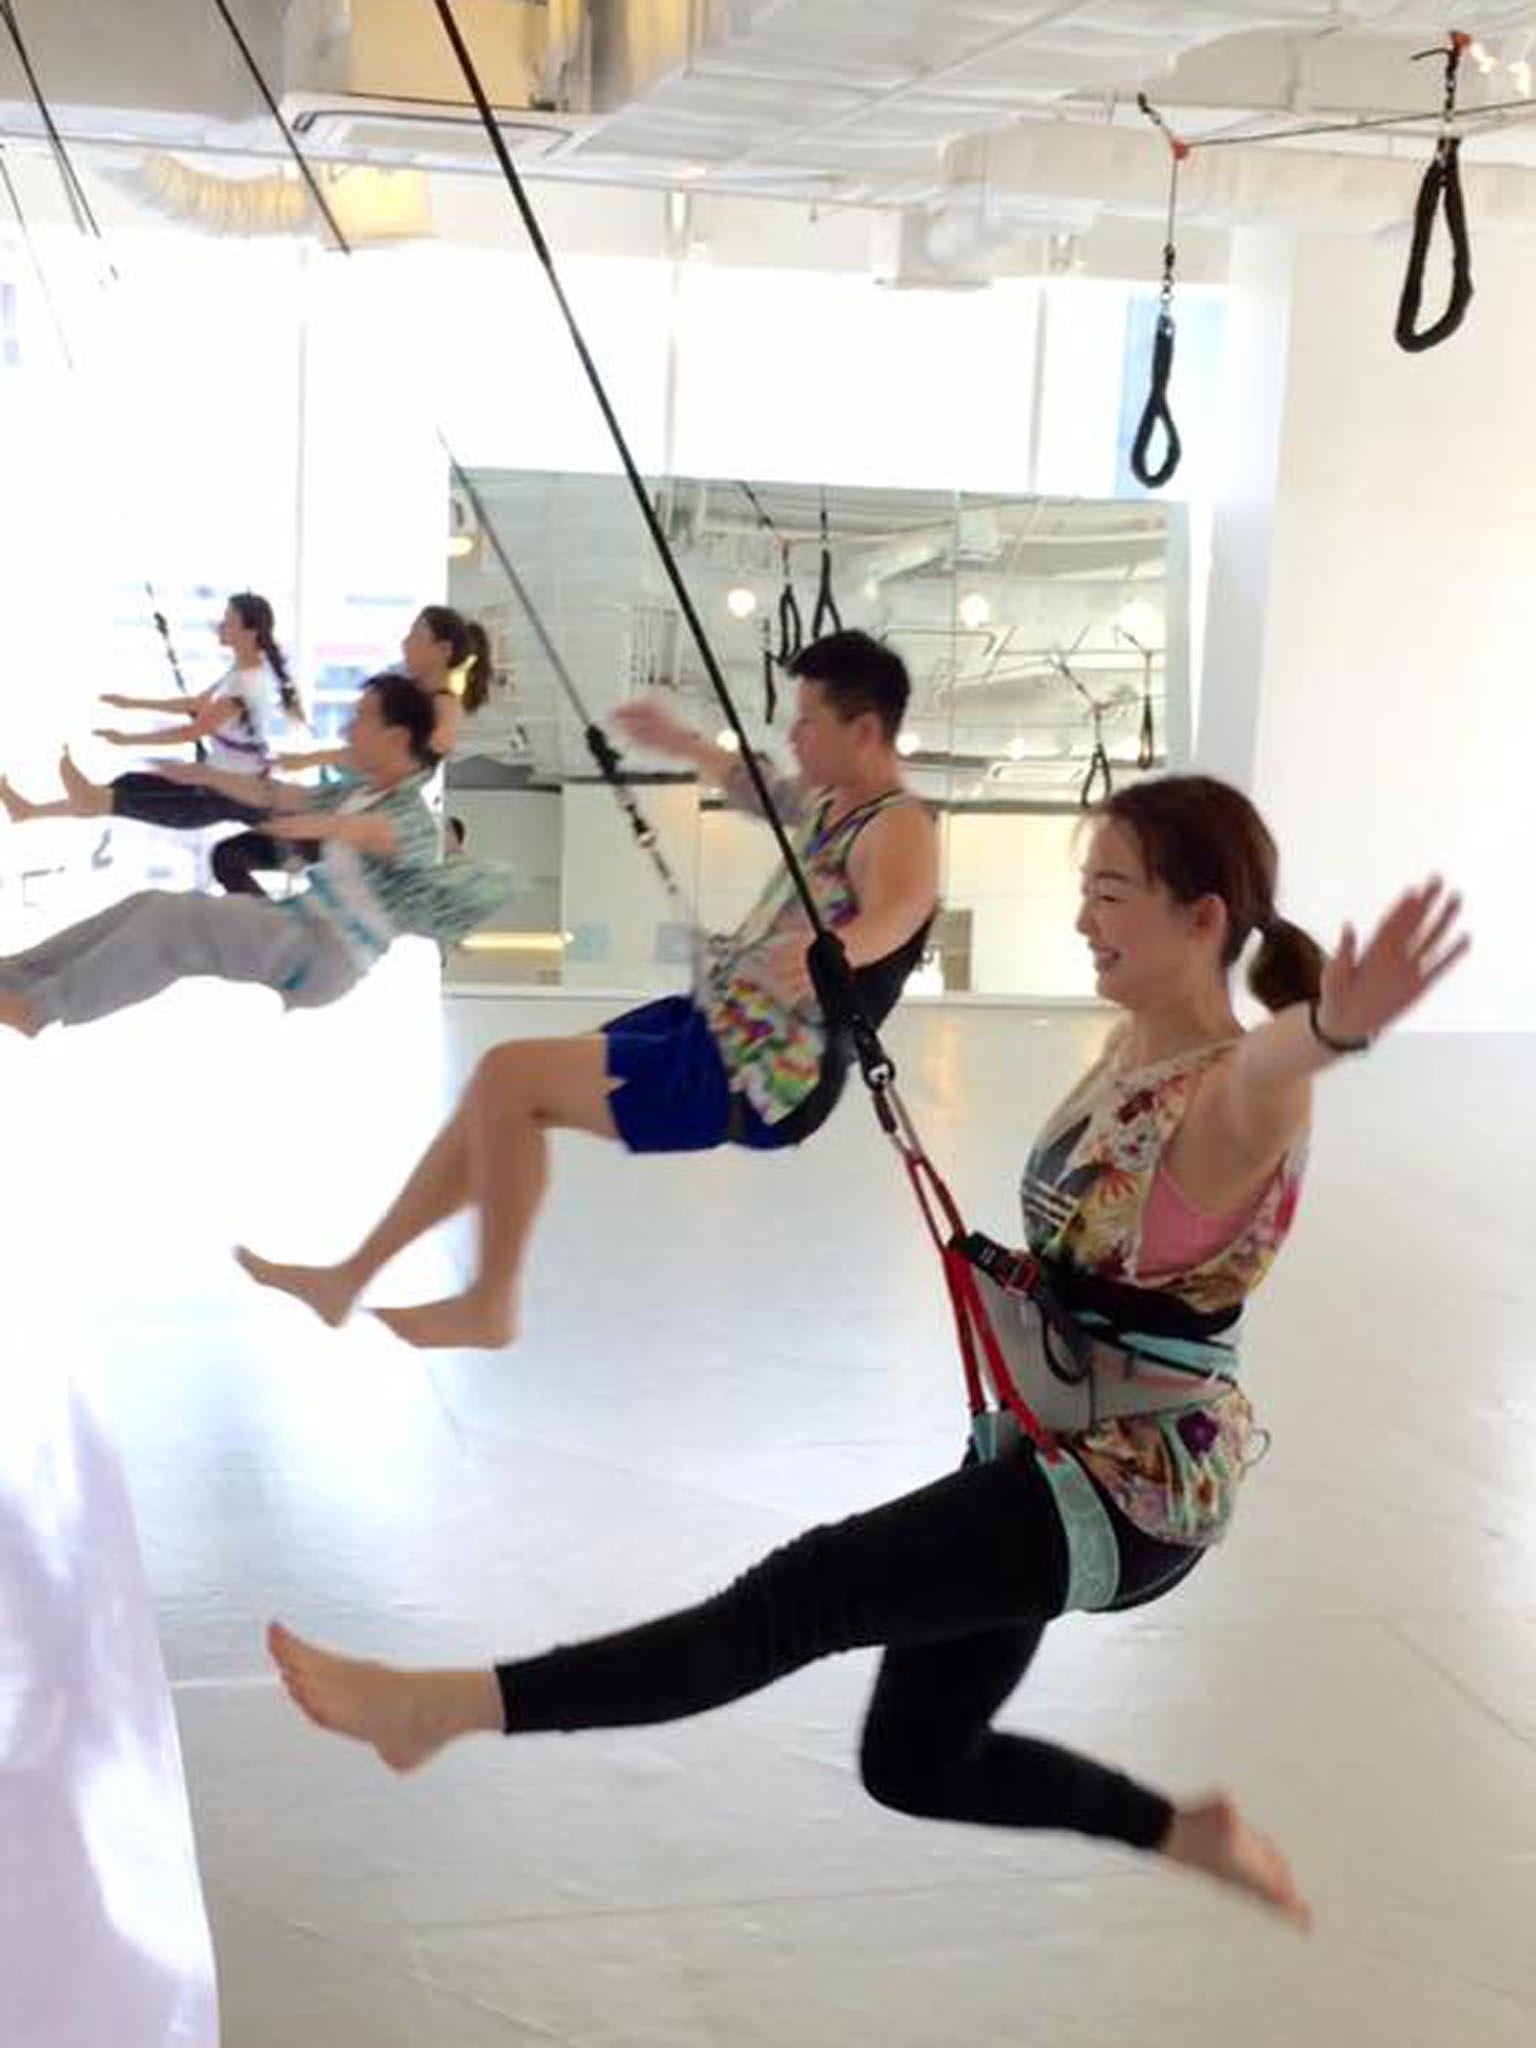 &#13;
The class is a fusion of dance and aerial aerobics&#13;